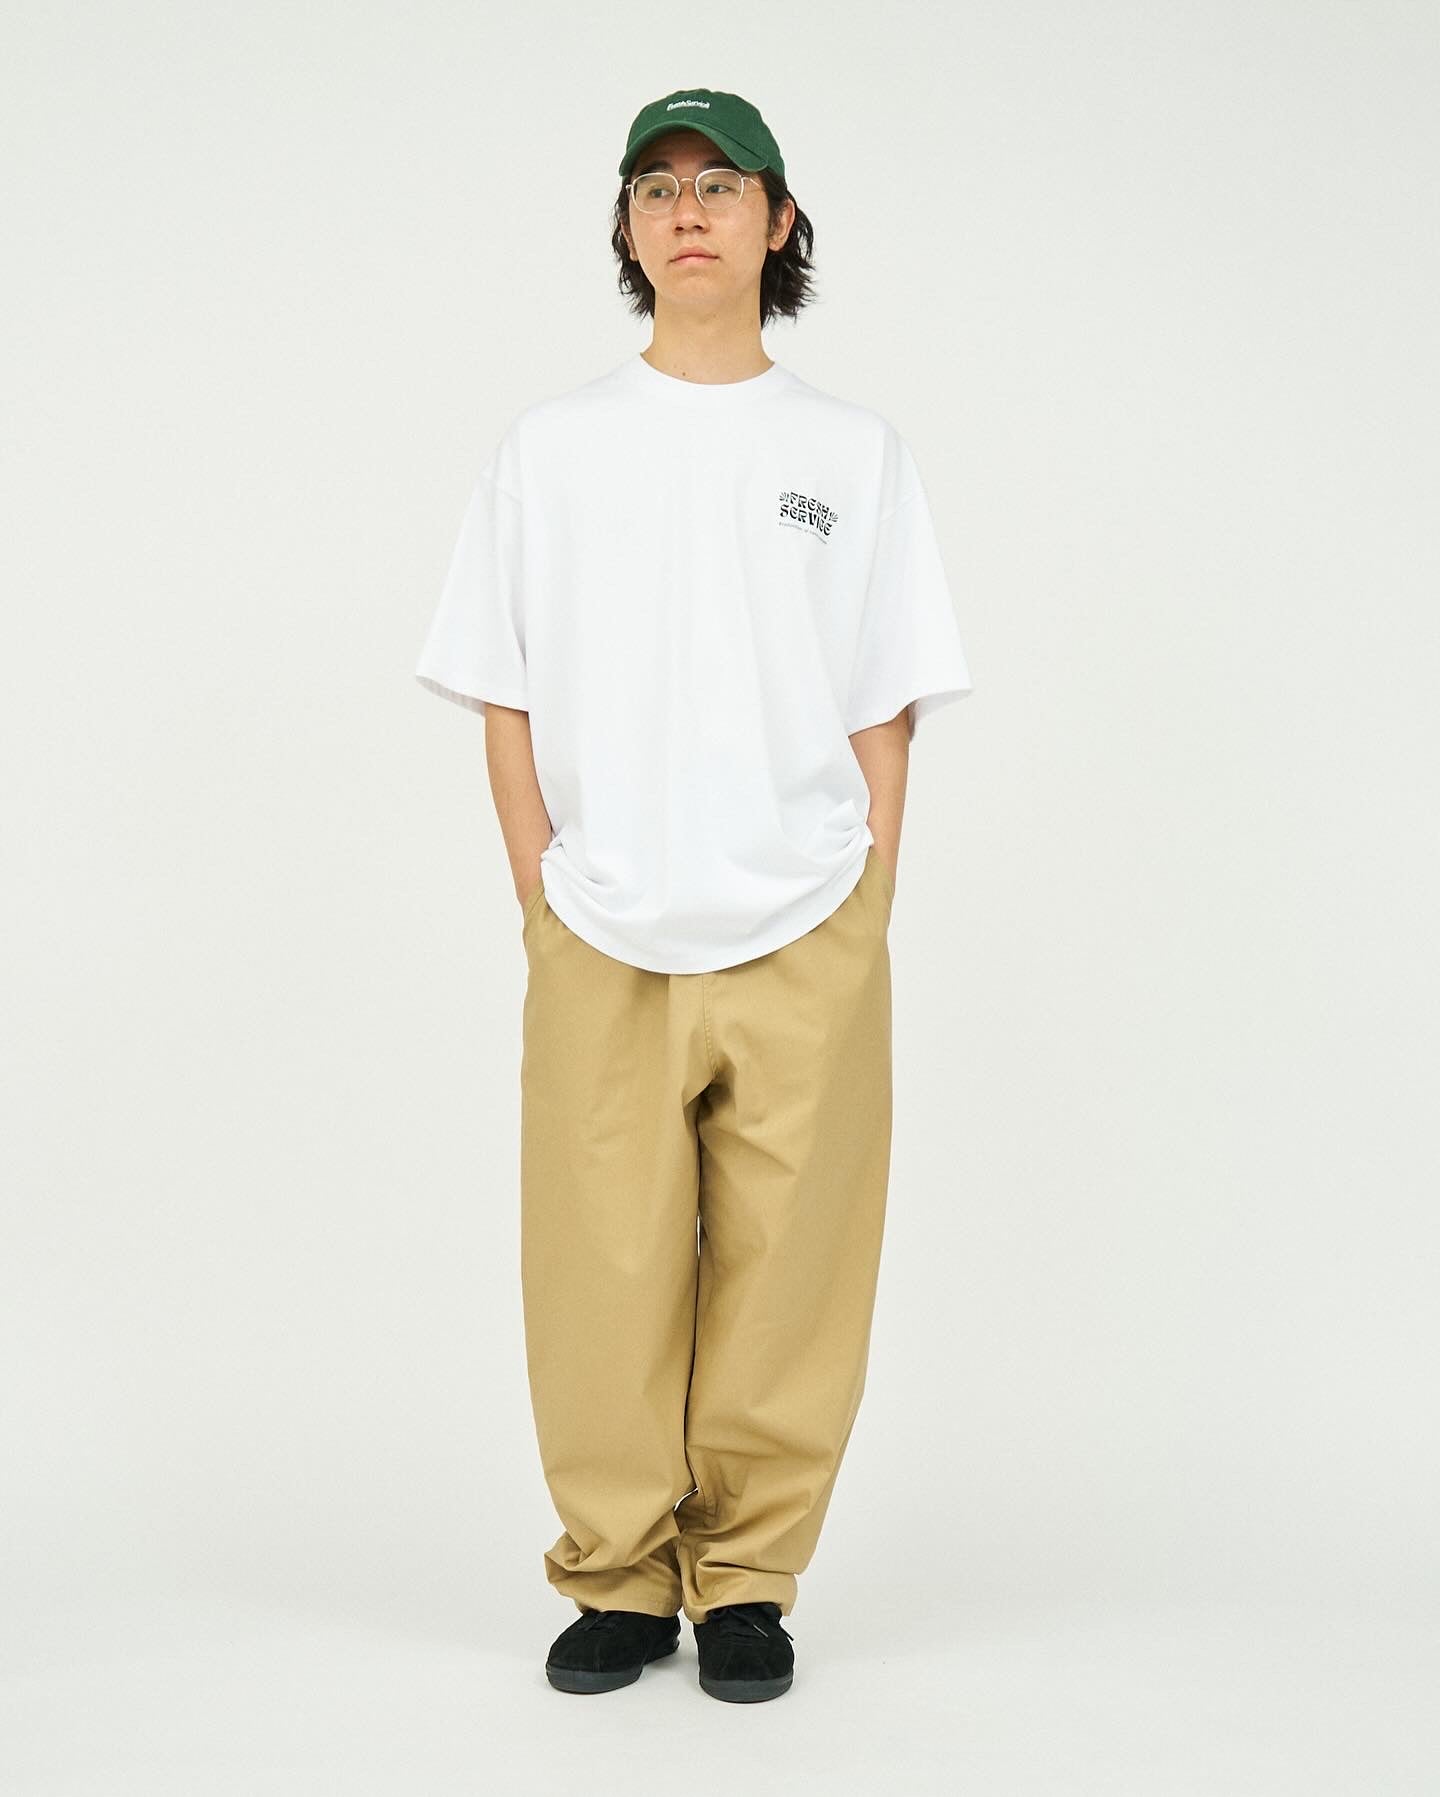 CORPORATE PRINTED S/S TEE ”ON LINES”